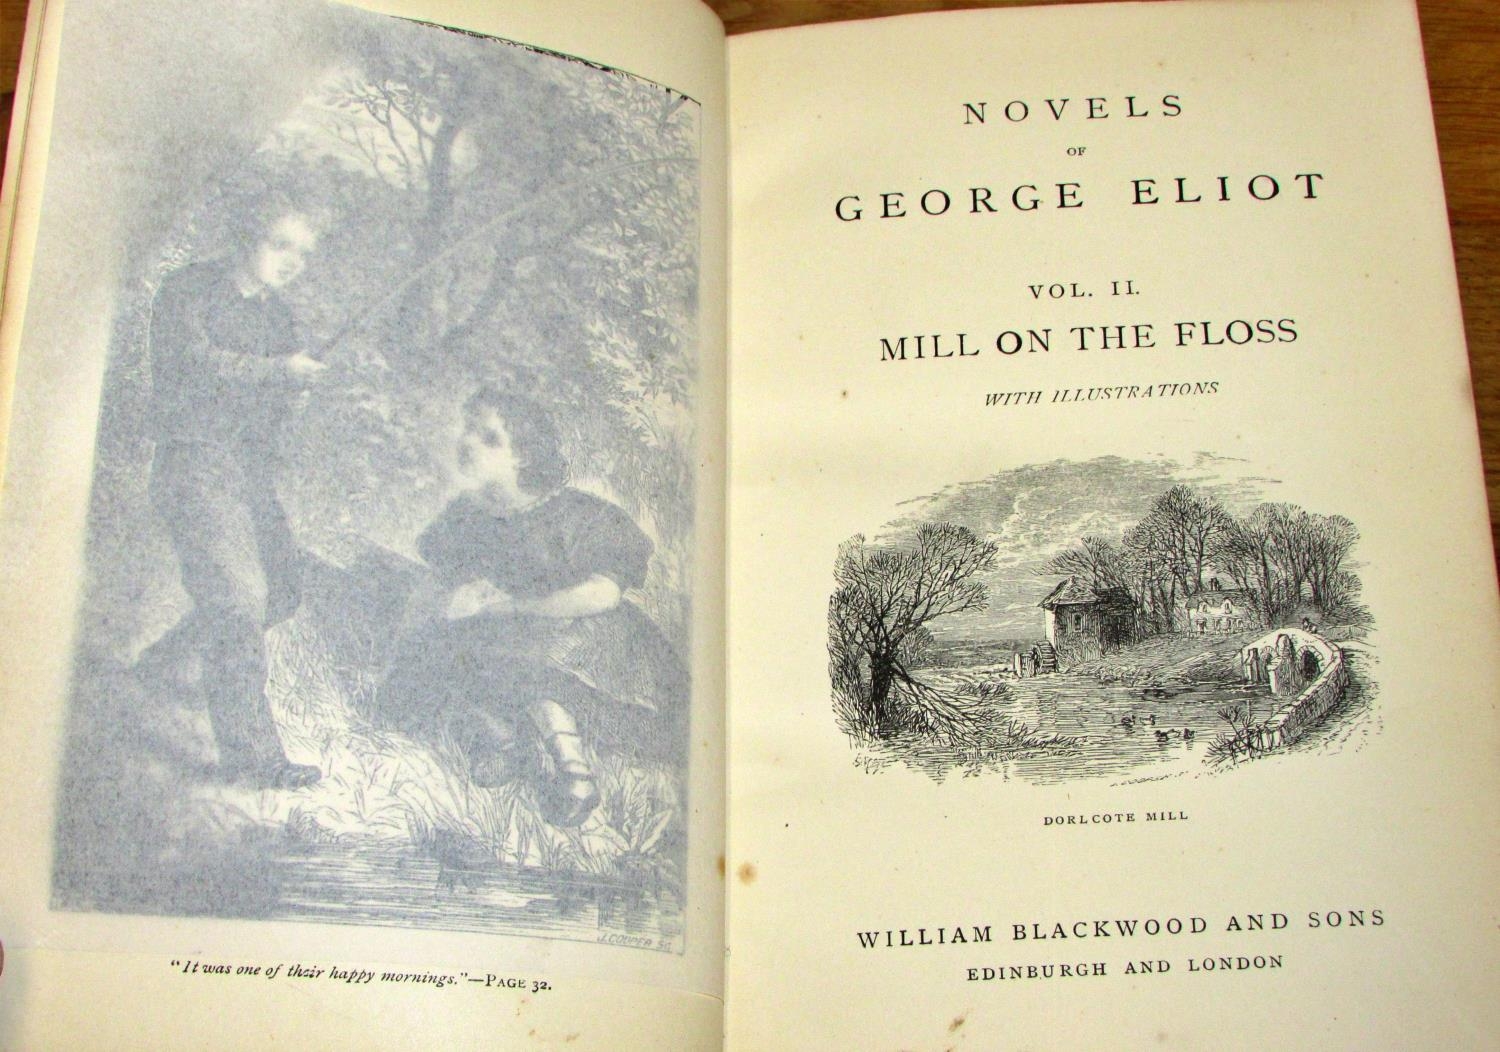 Six leatherbound novels by George Eliot - Silas Marner, Romola, Mill on the Floss, Daniel Deronda, - Image 3 of 3